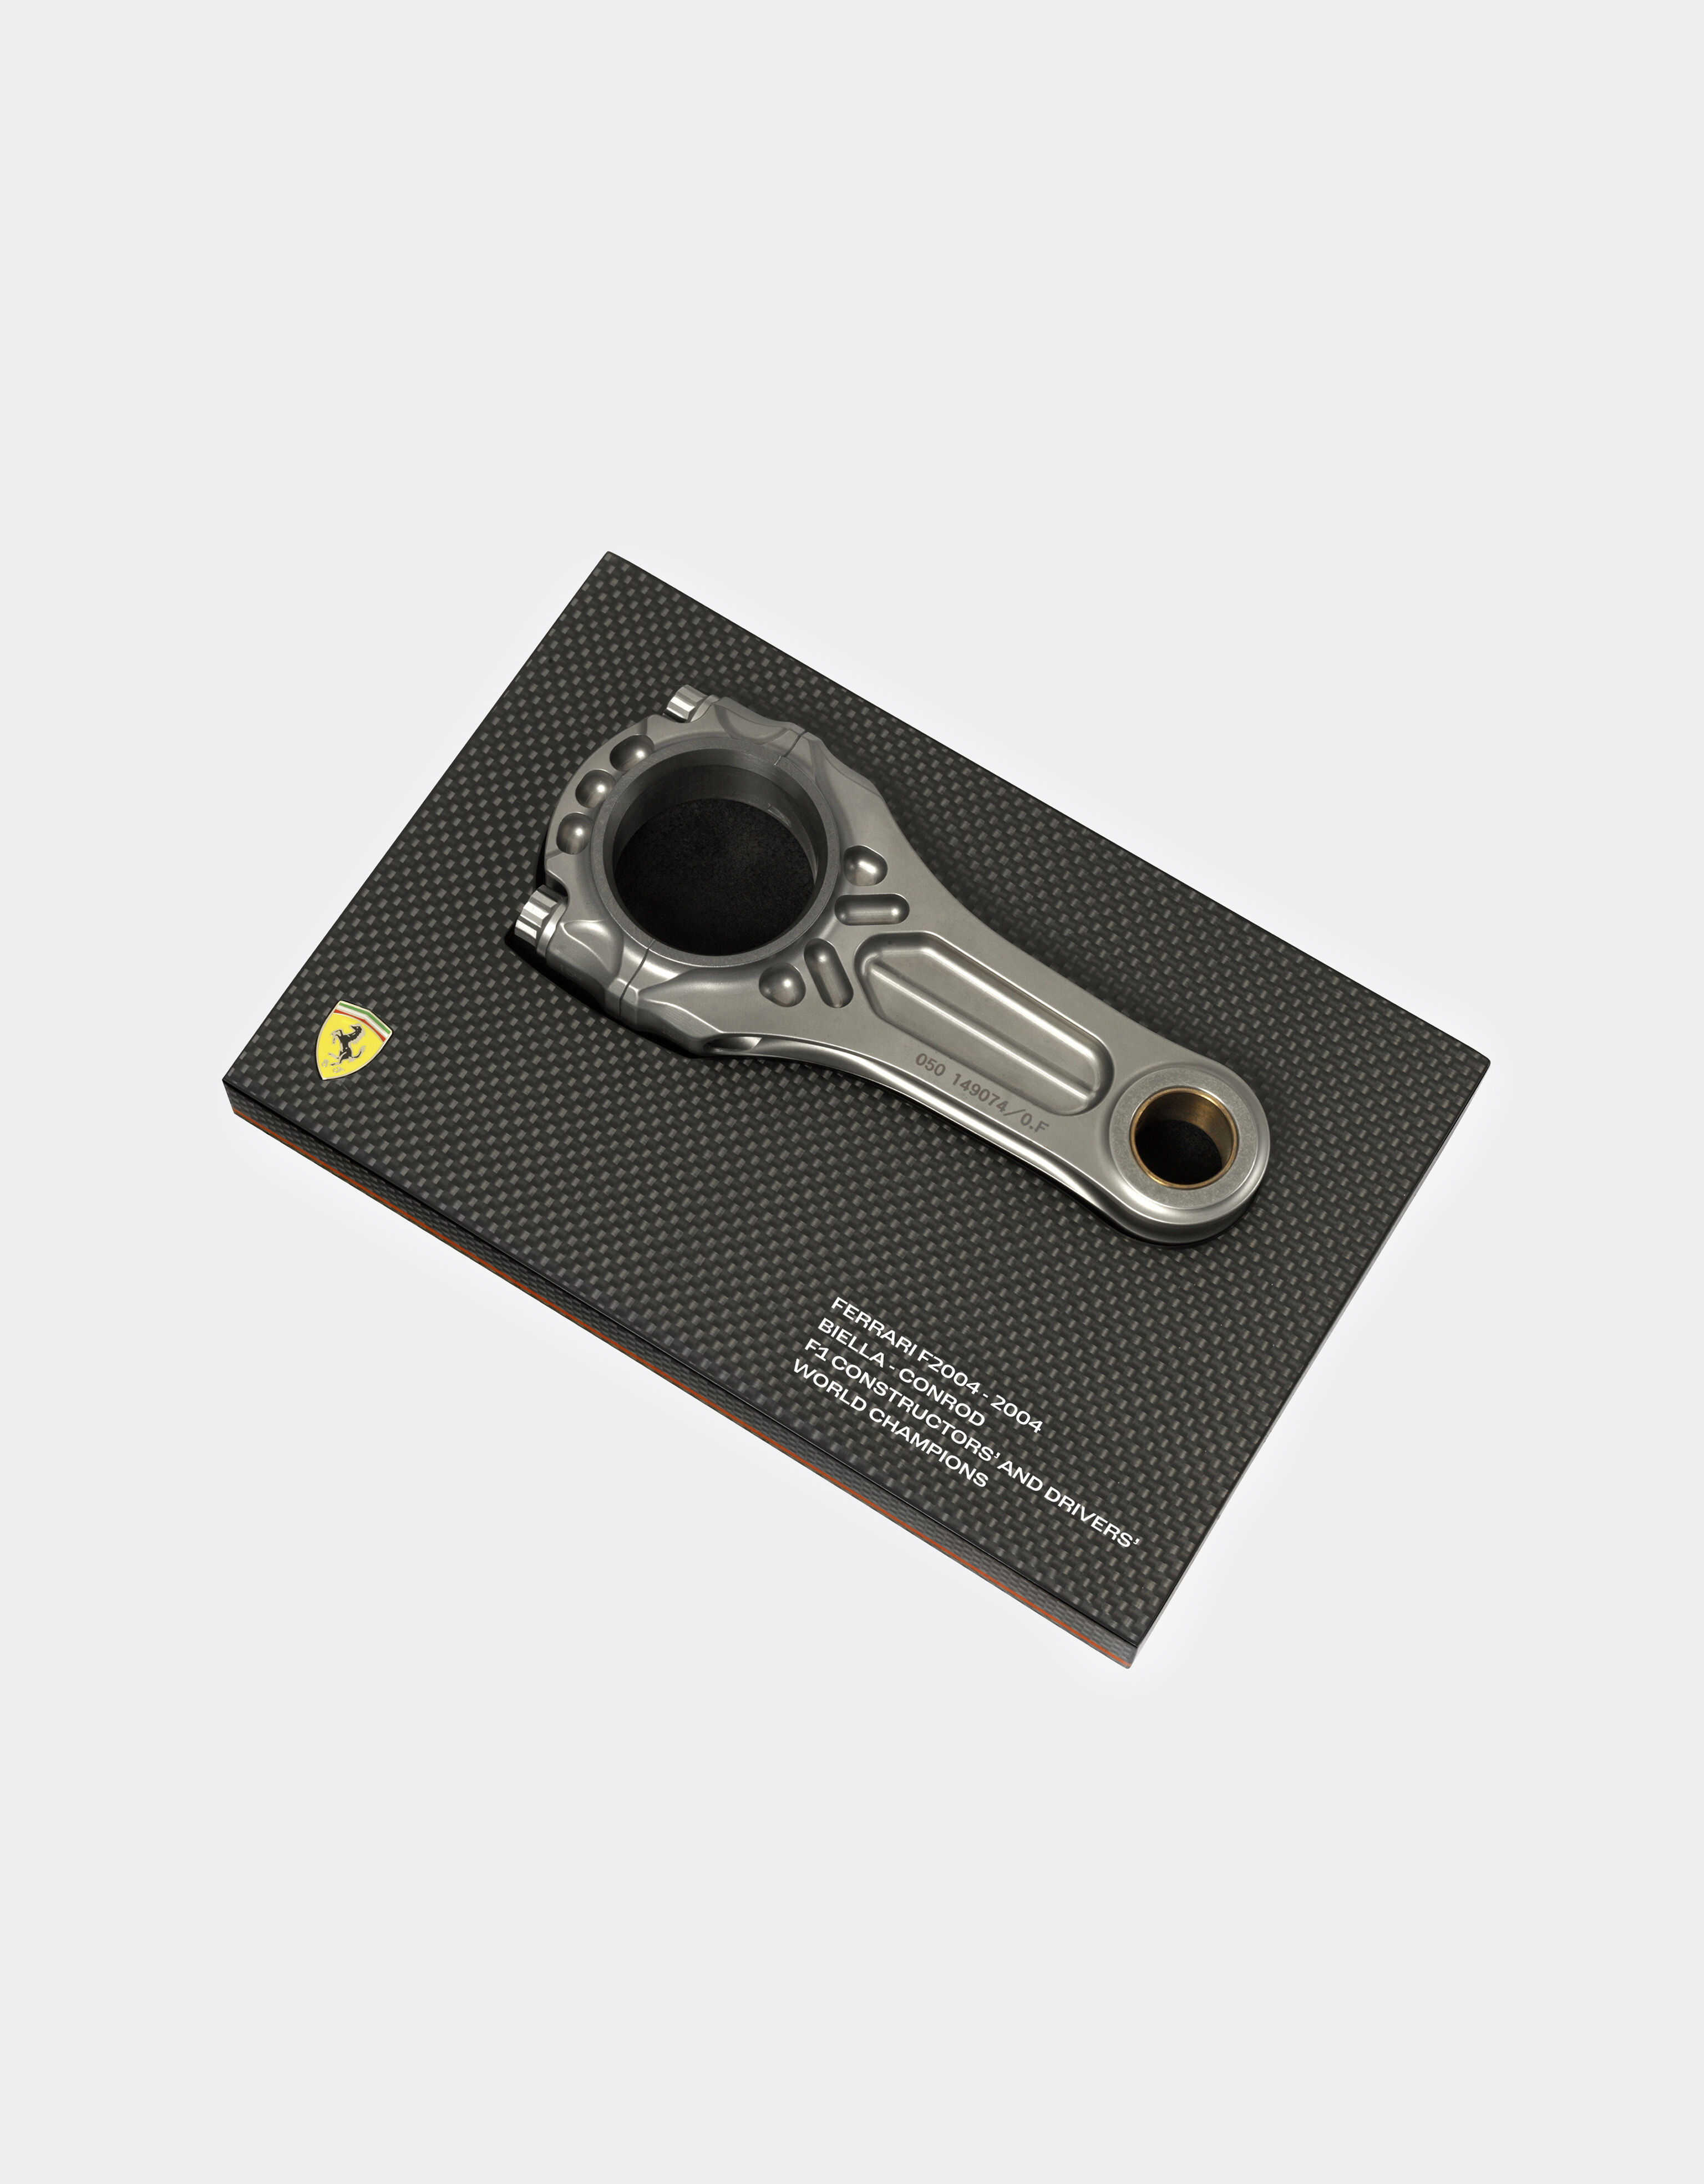 Ferrari Original connecting rod from the F2004, winner of the 2004 Constructors' and Drivers' Championships MULTICOLOUR F1067f